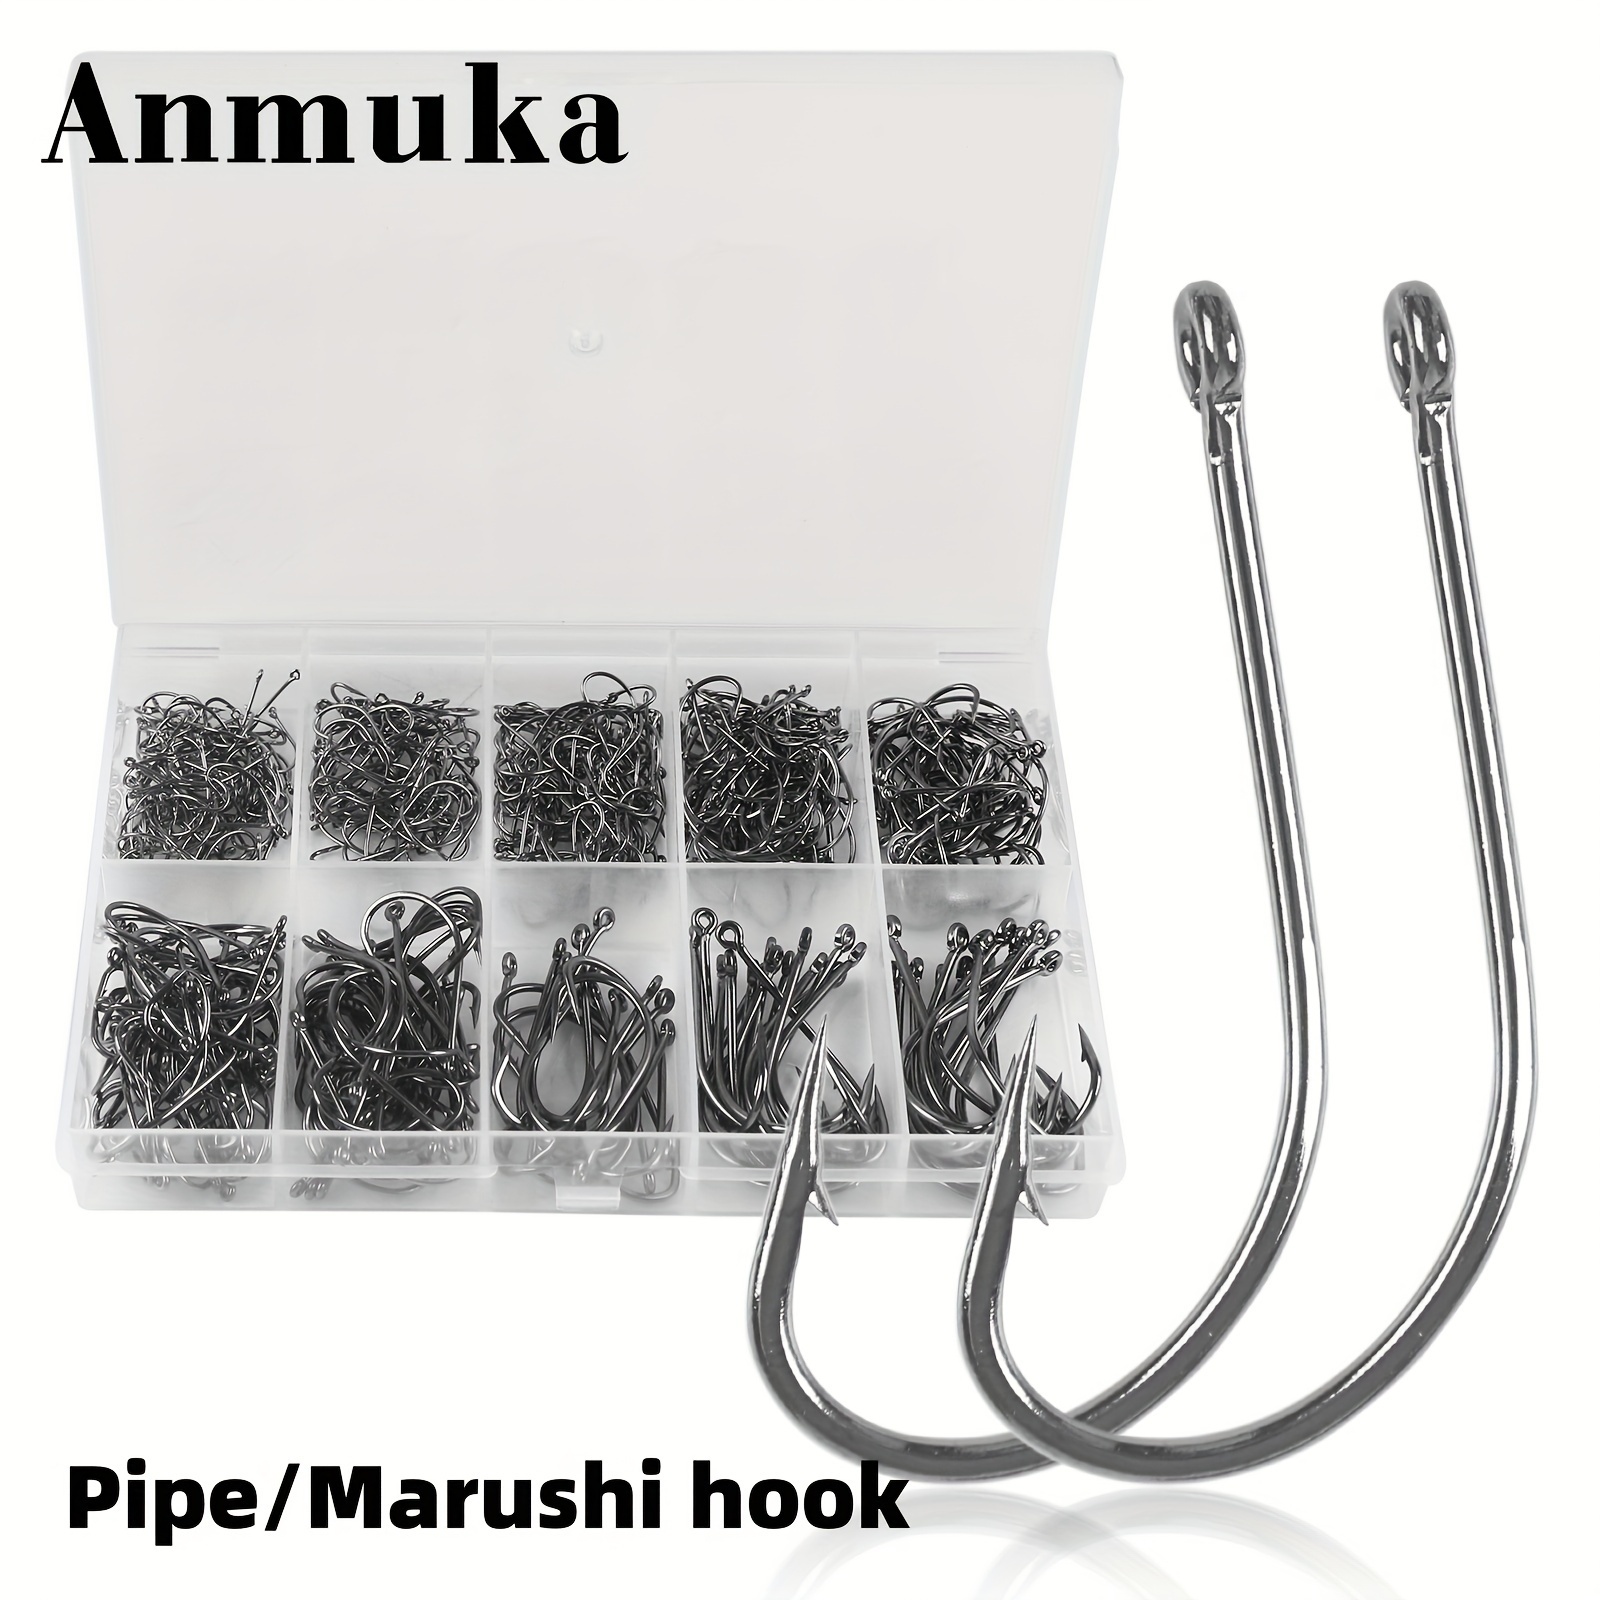 300/500pcs Mixed Sizes Fishing Hook With Eye And Barb, Long Shank Fishing  Hooks For Sea Bass, Fishing Tackle